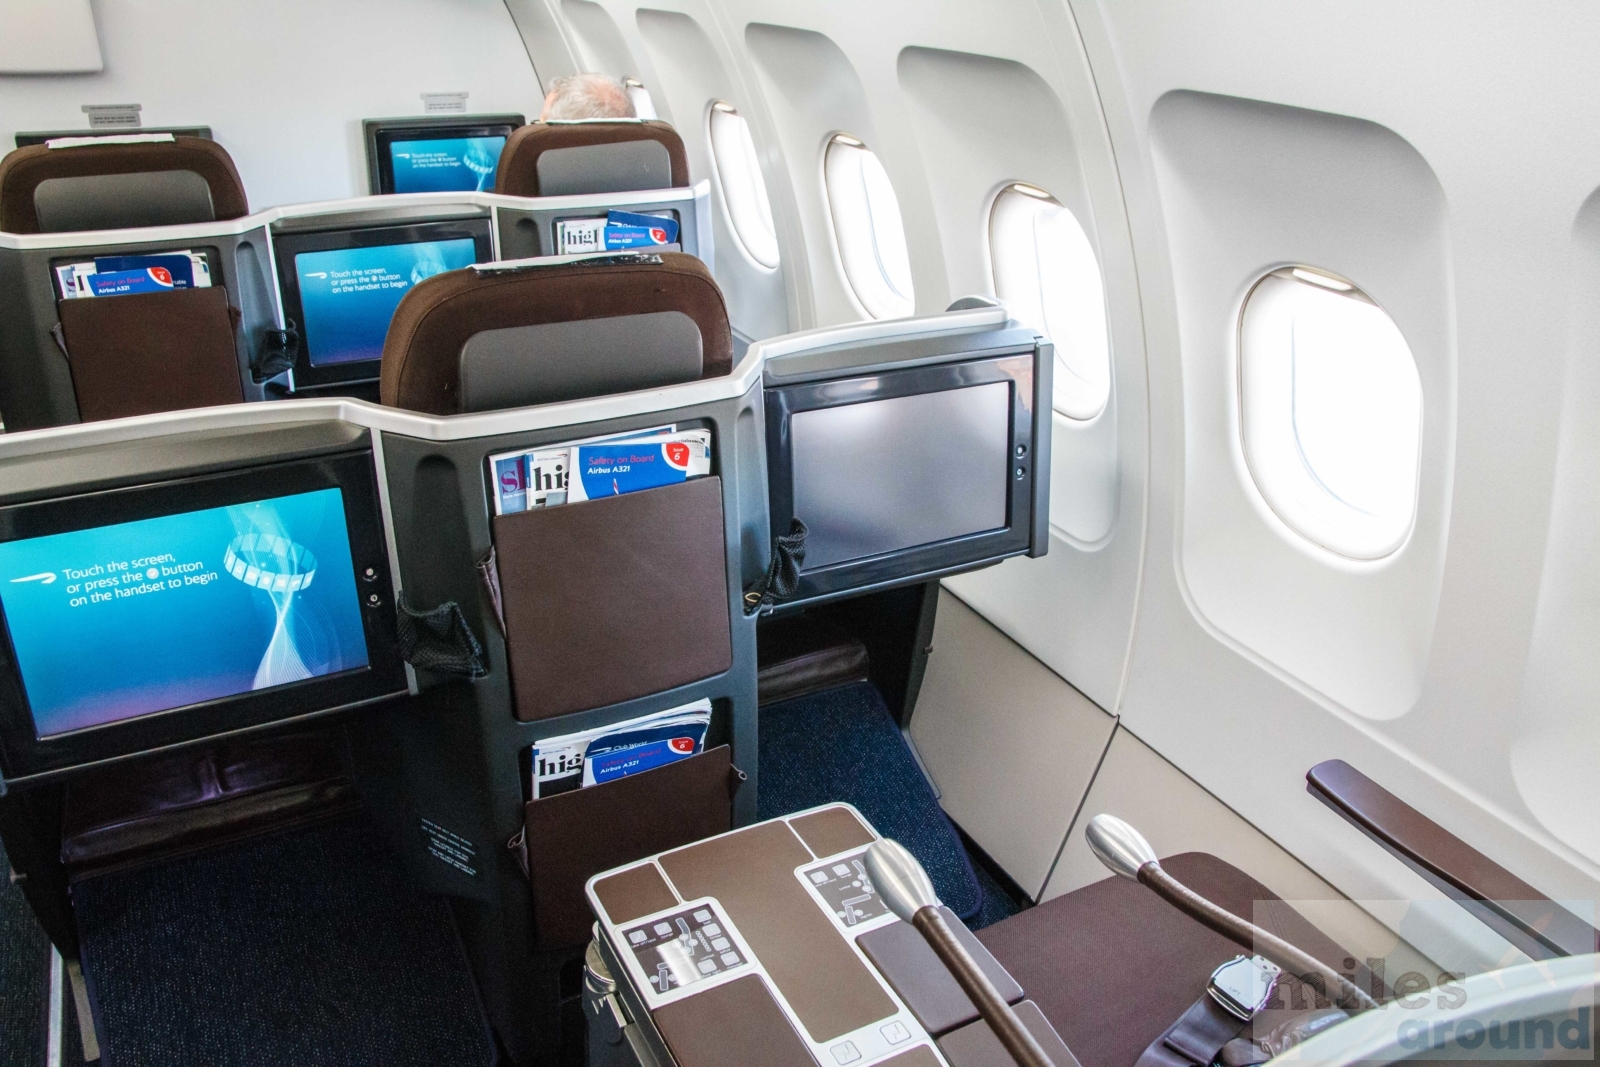 British Airways long haul Business Class on the Airbus A321 to Oslo